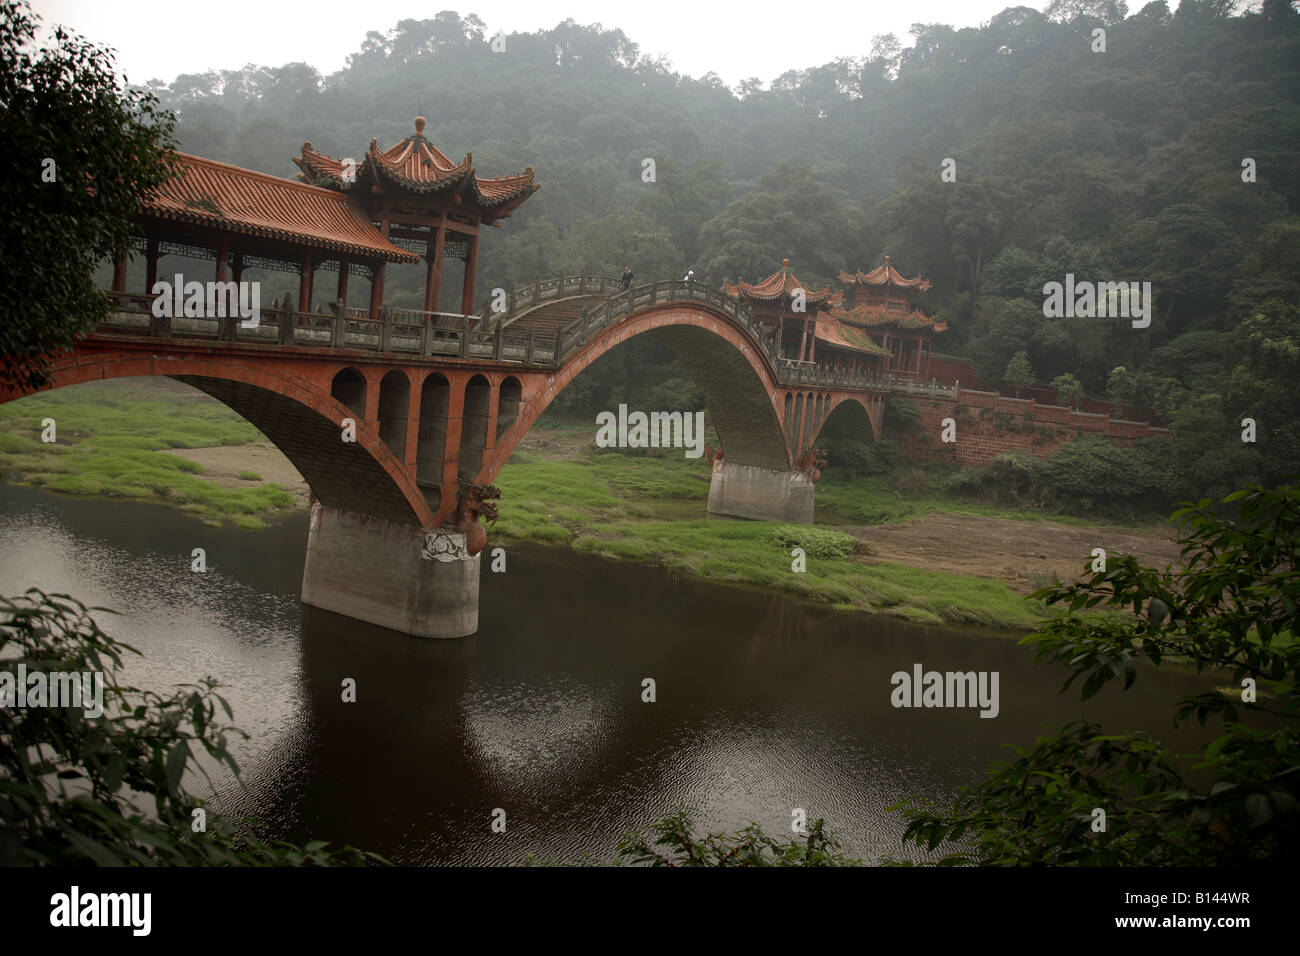 A Chinese bridge over a river in Leshan close to the Giant Buddha tourist attraction Stock Photo